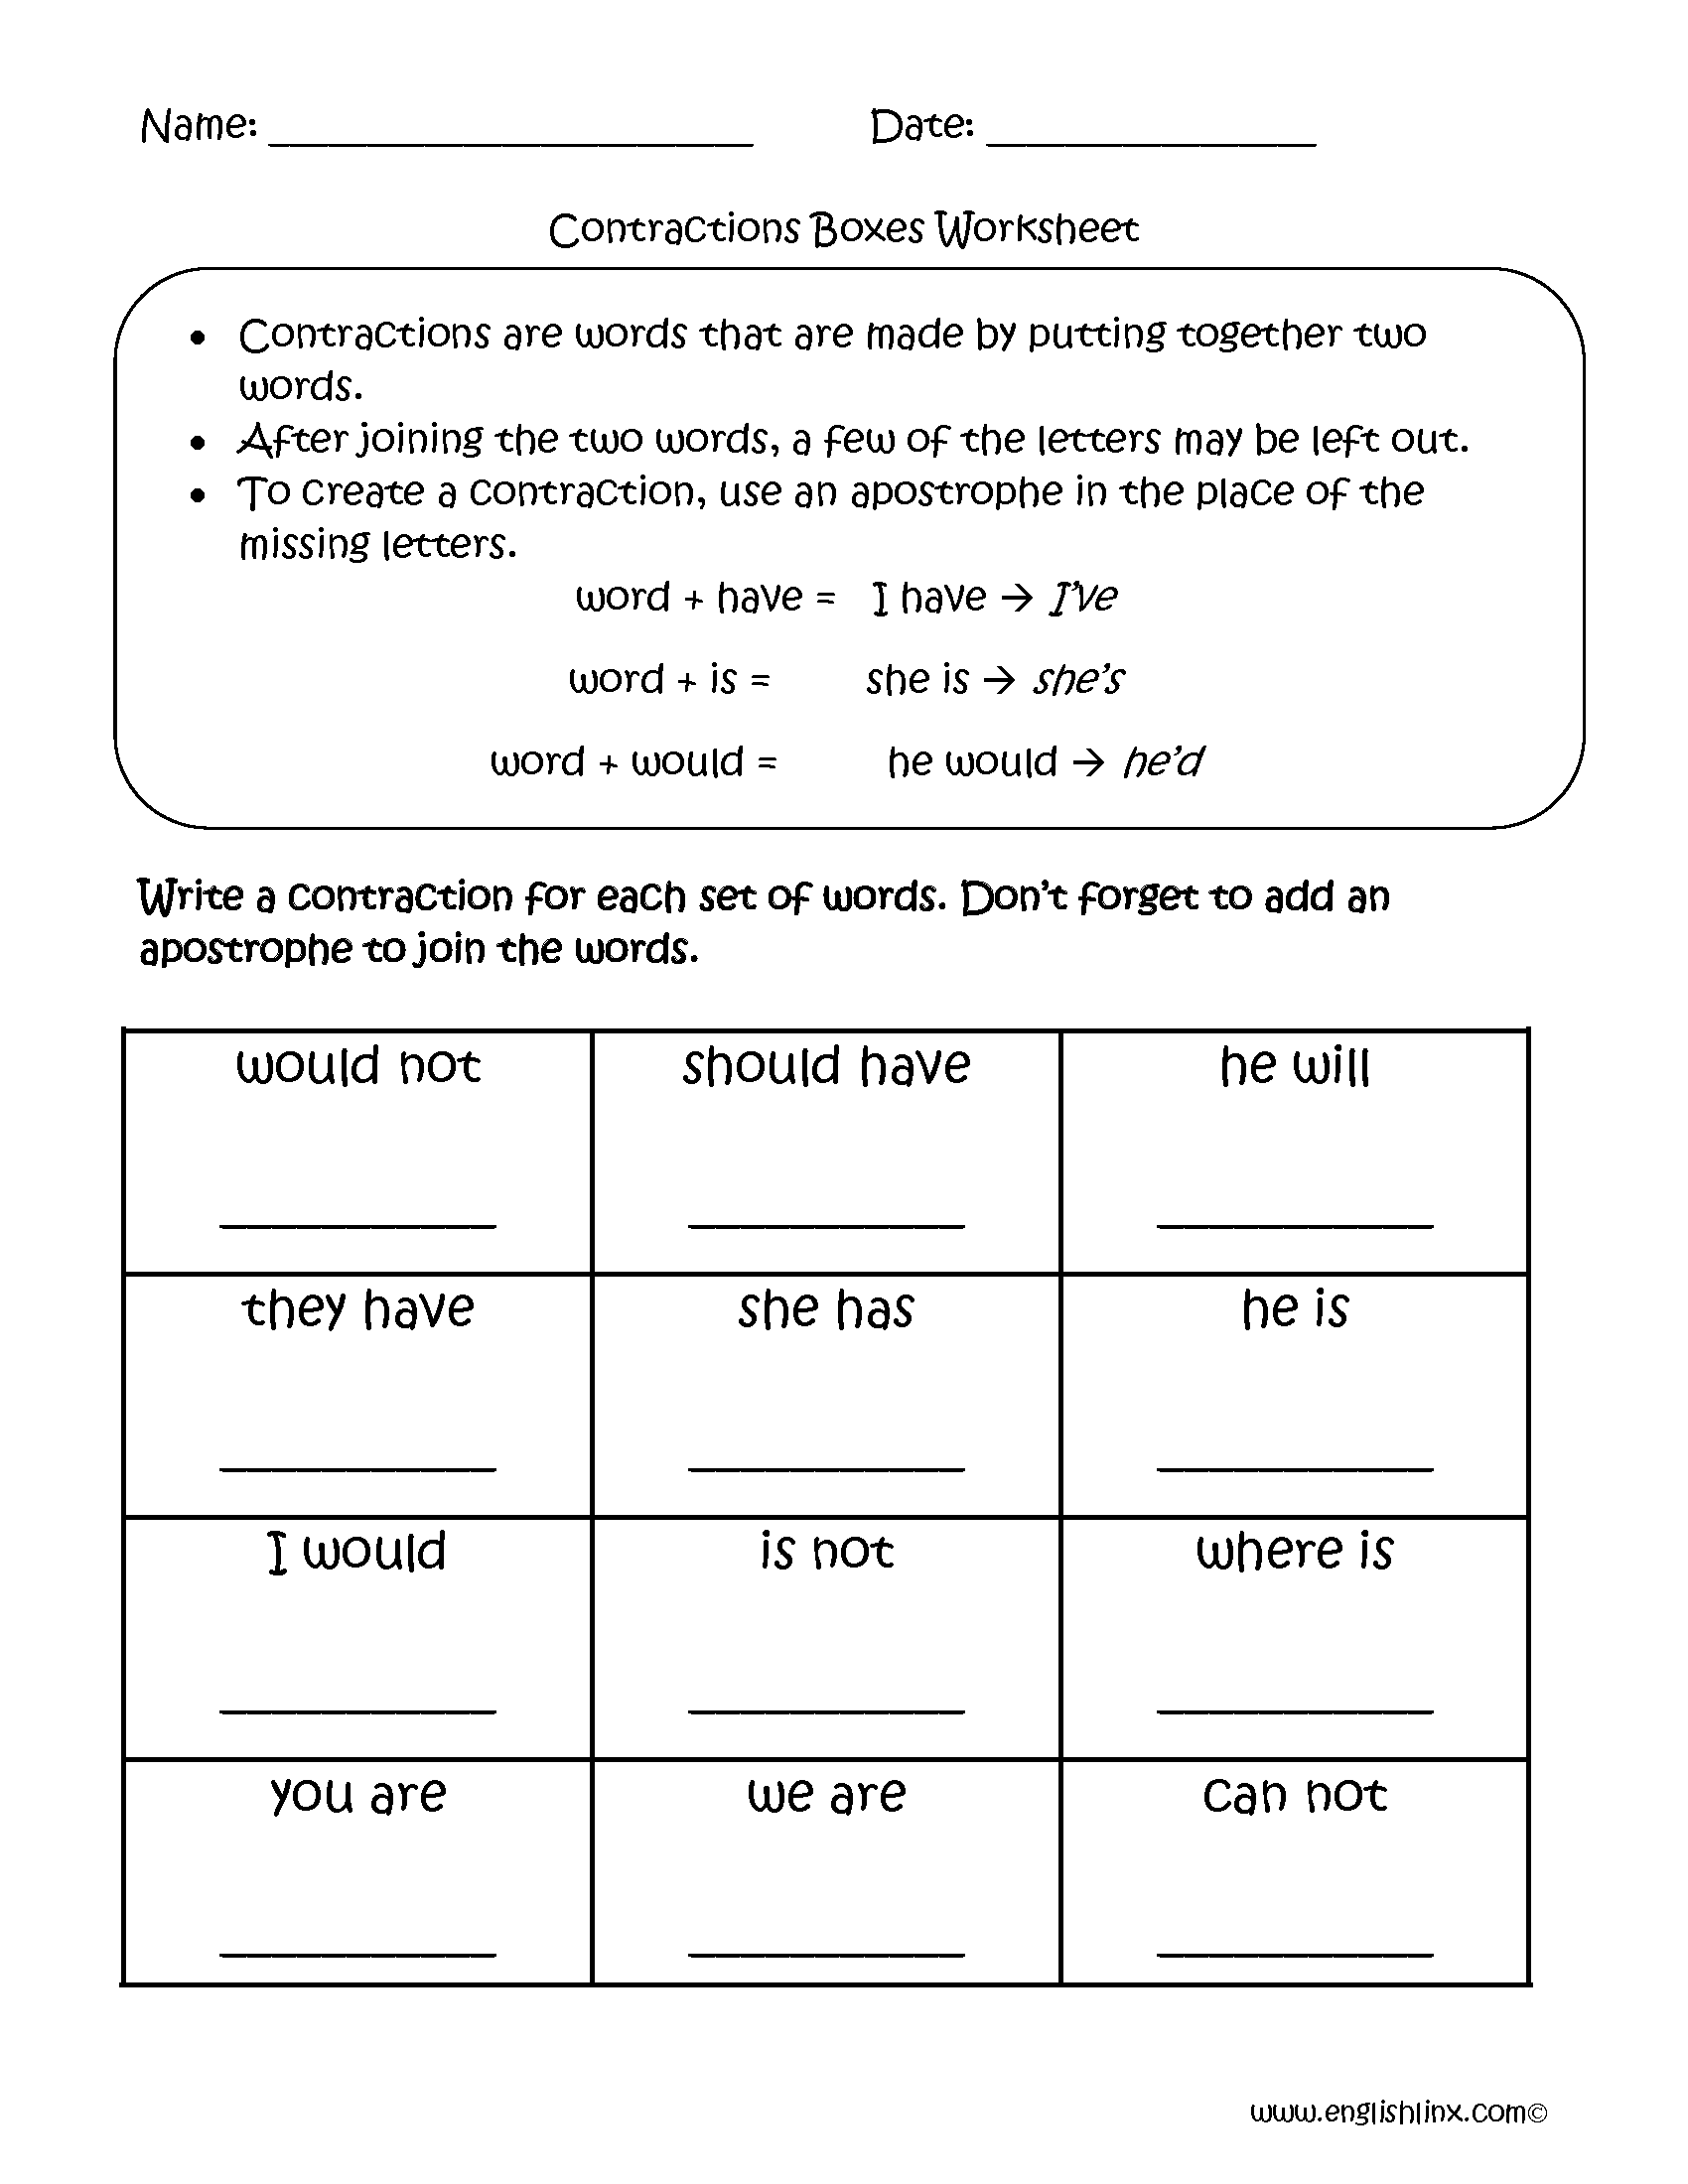 Contractions Boxes Worksheets